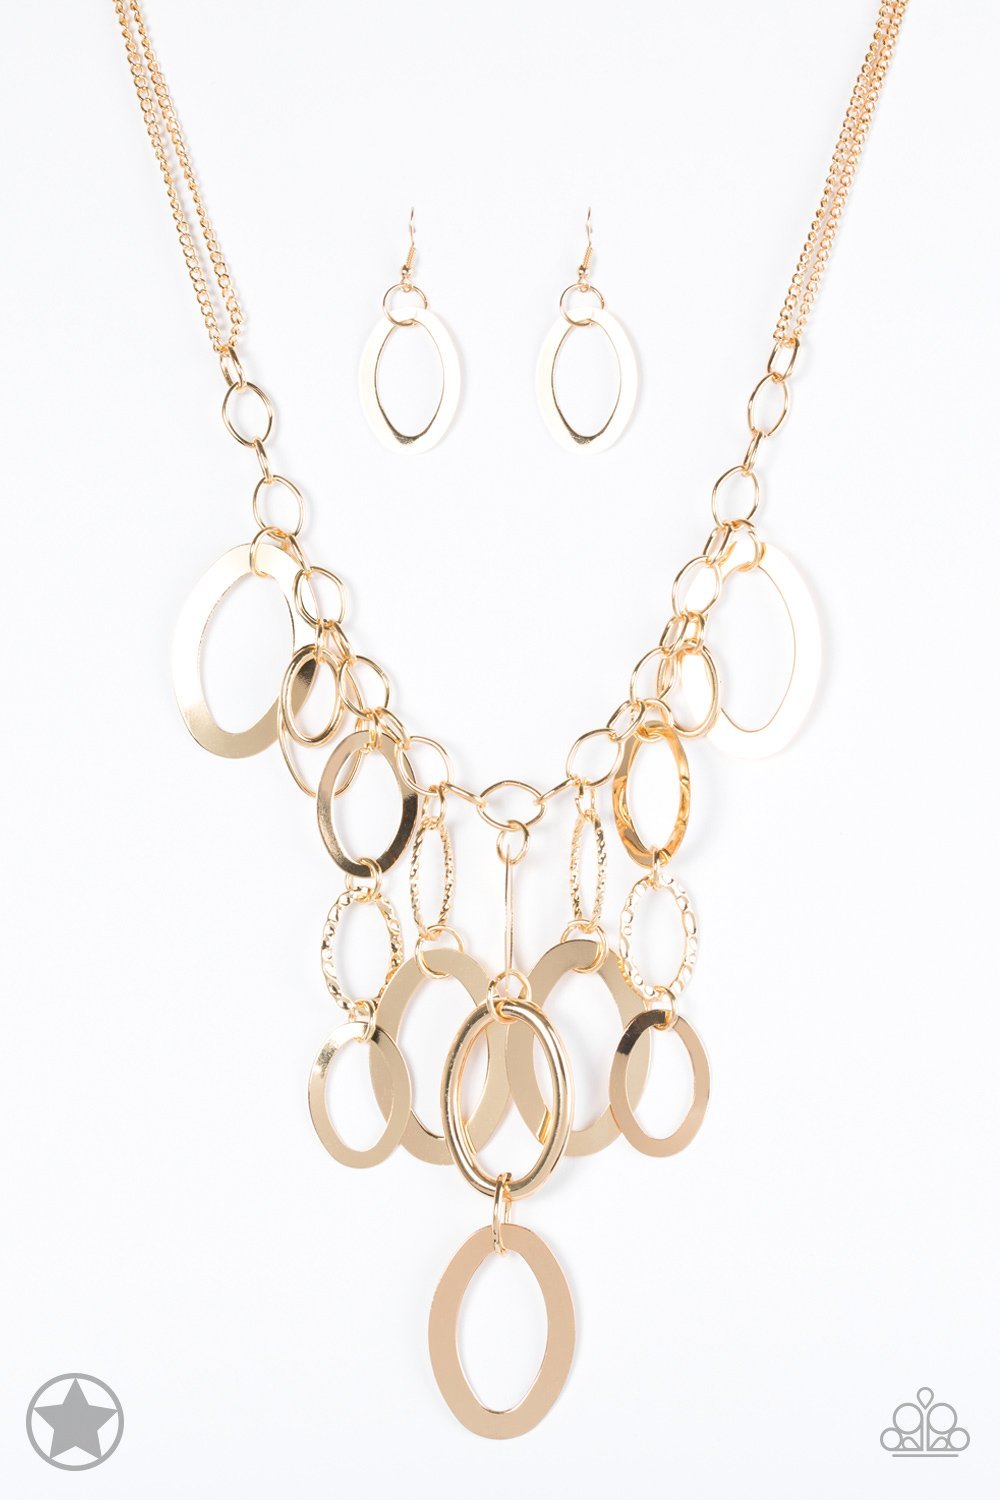 A Golden Spell - Gold Fashion Necklace - Paparazzi Accessories - Large gold links and shimmering textured gold rings cascade below a gold chain freely, allowing for movement that makes a bold statement.